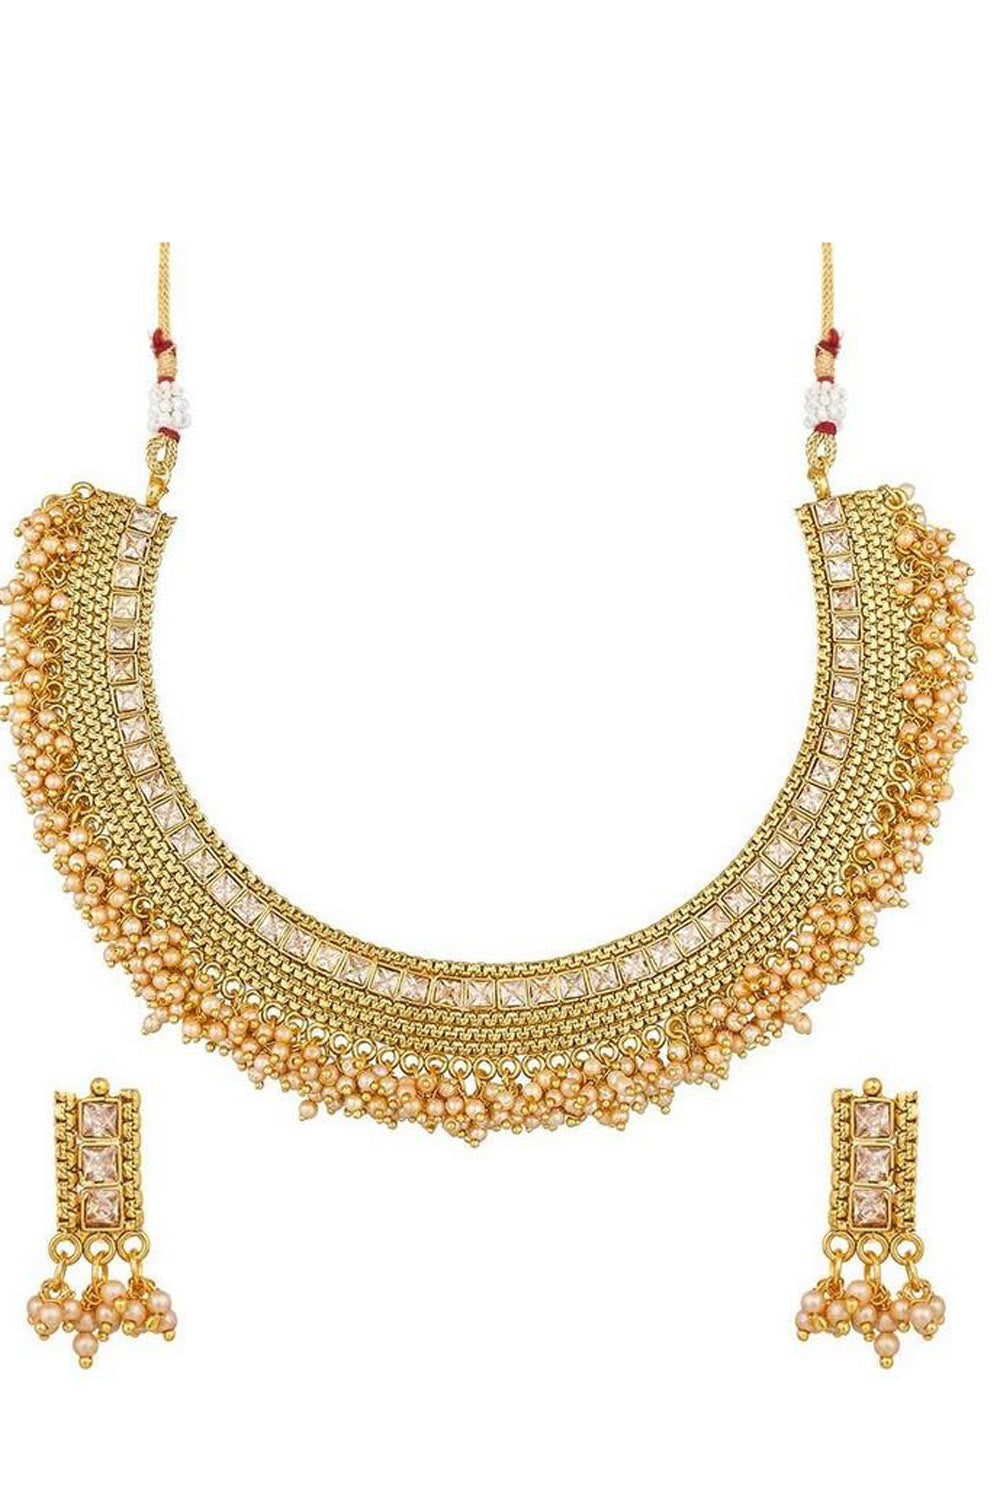 Women's Alloy Necklace in Gold and Beige